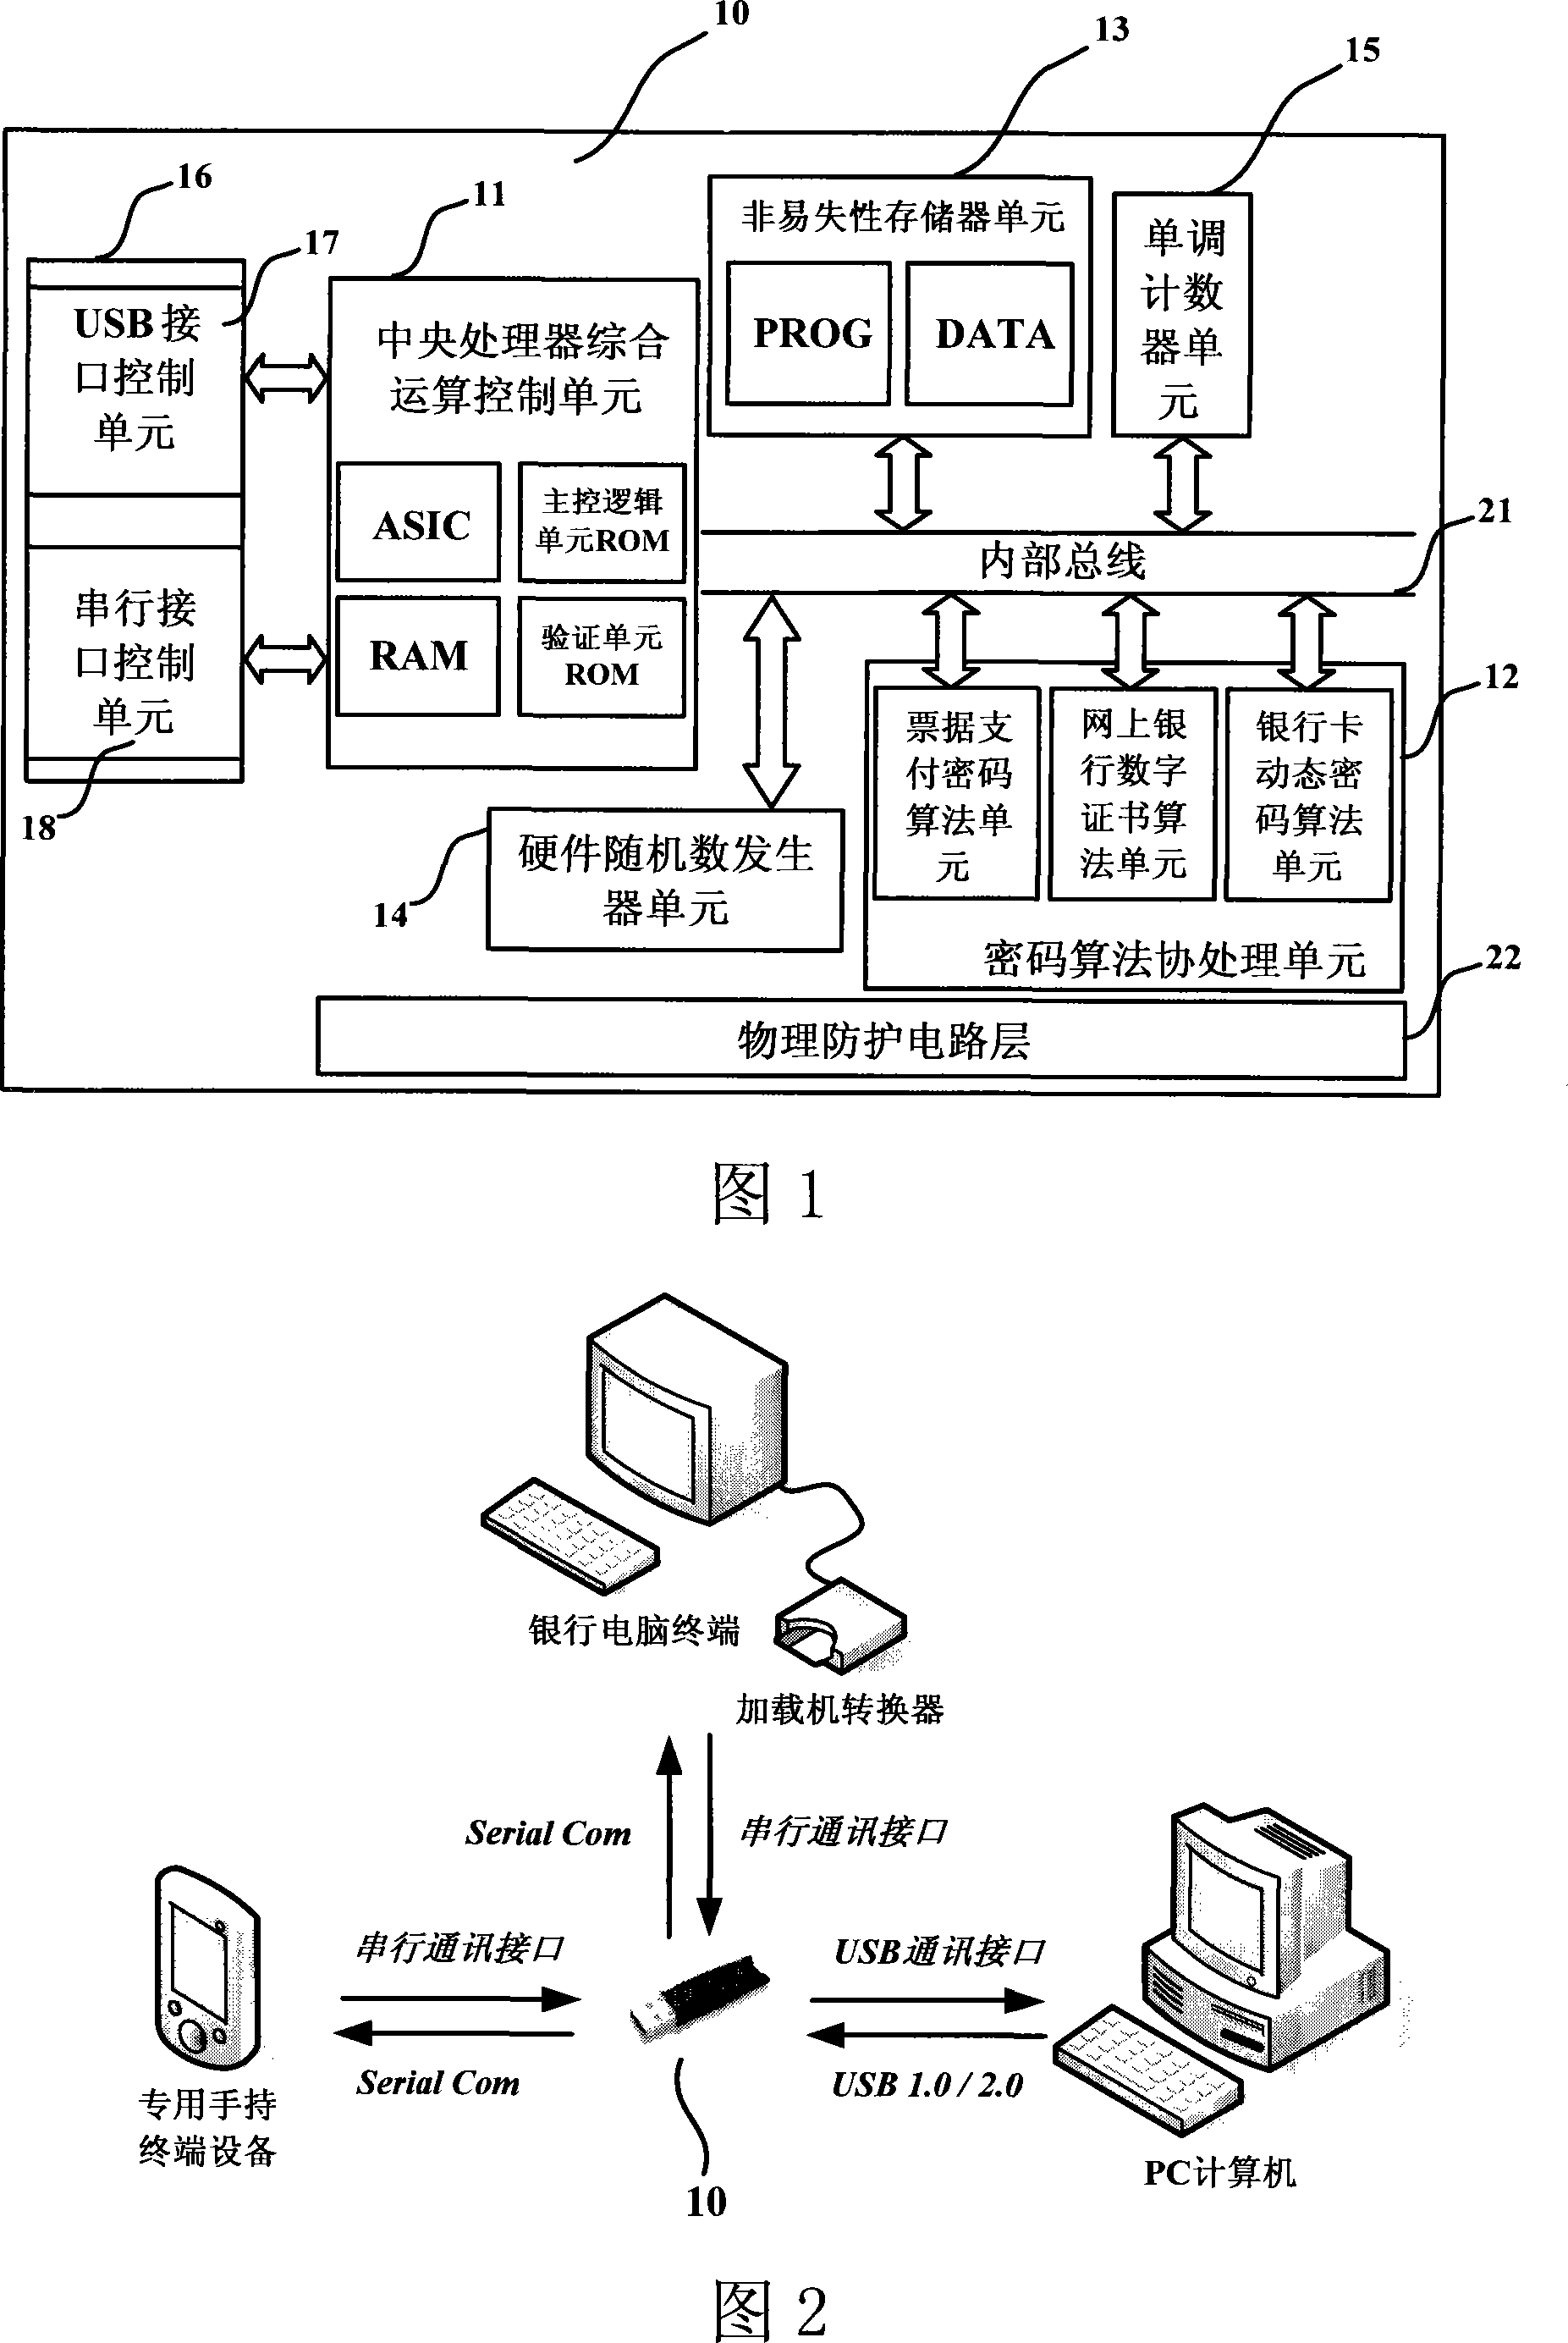 Multi-use safety device for computing electronic payment code and its generating method